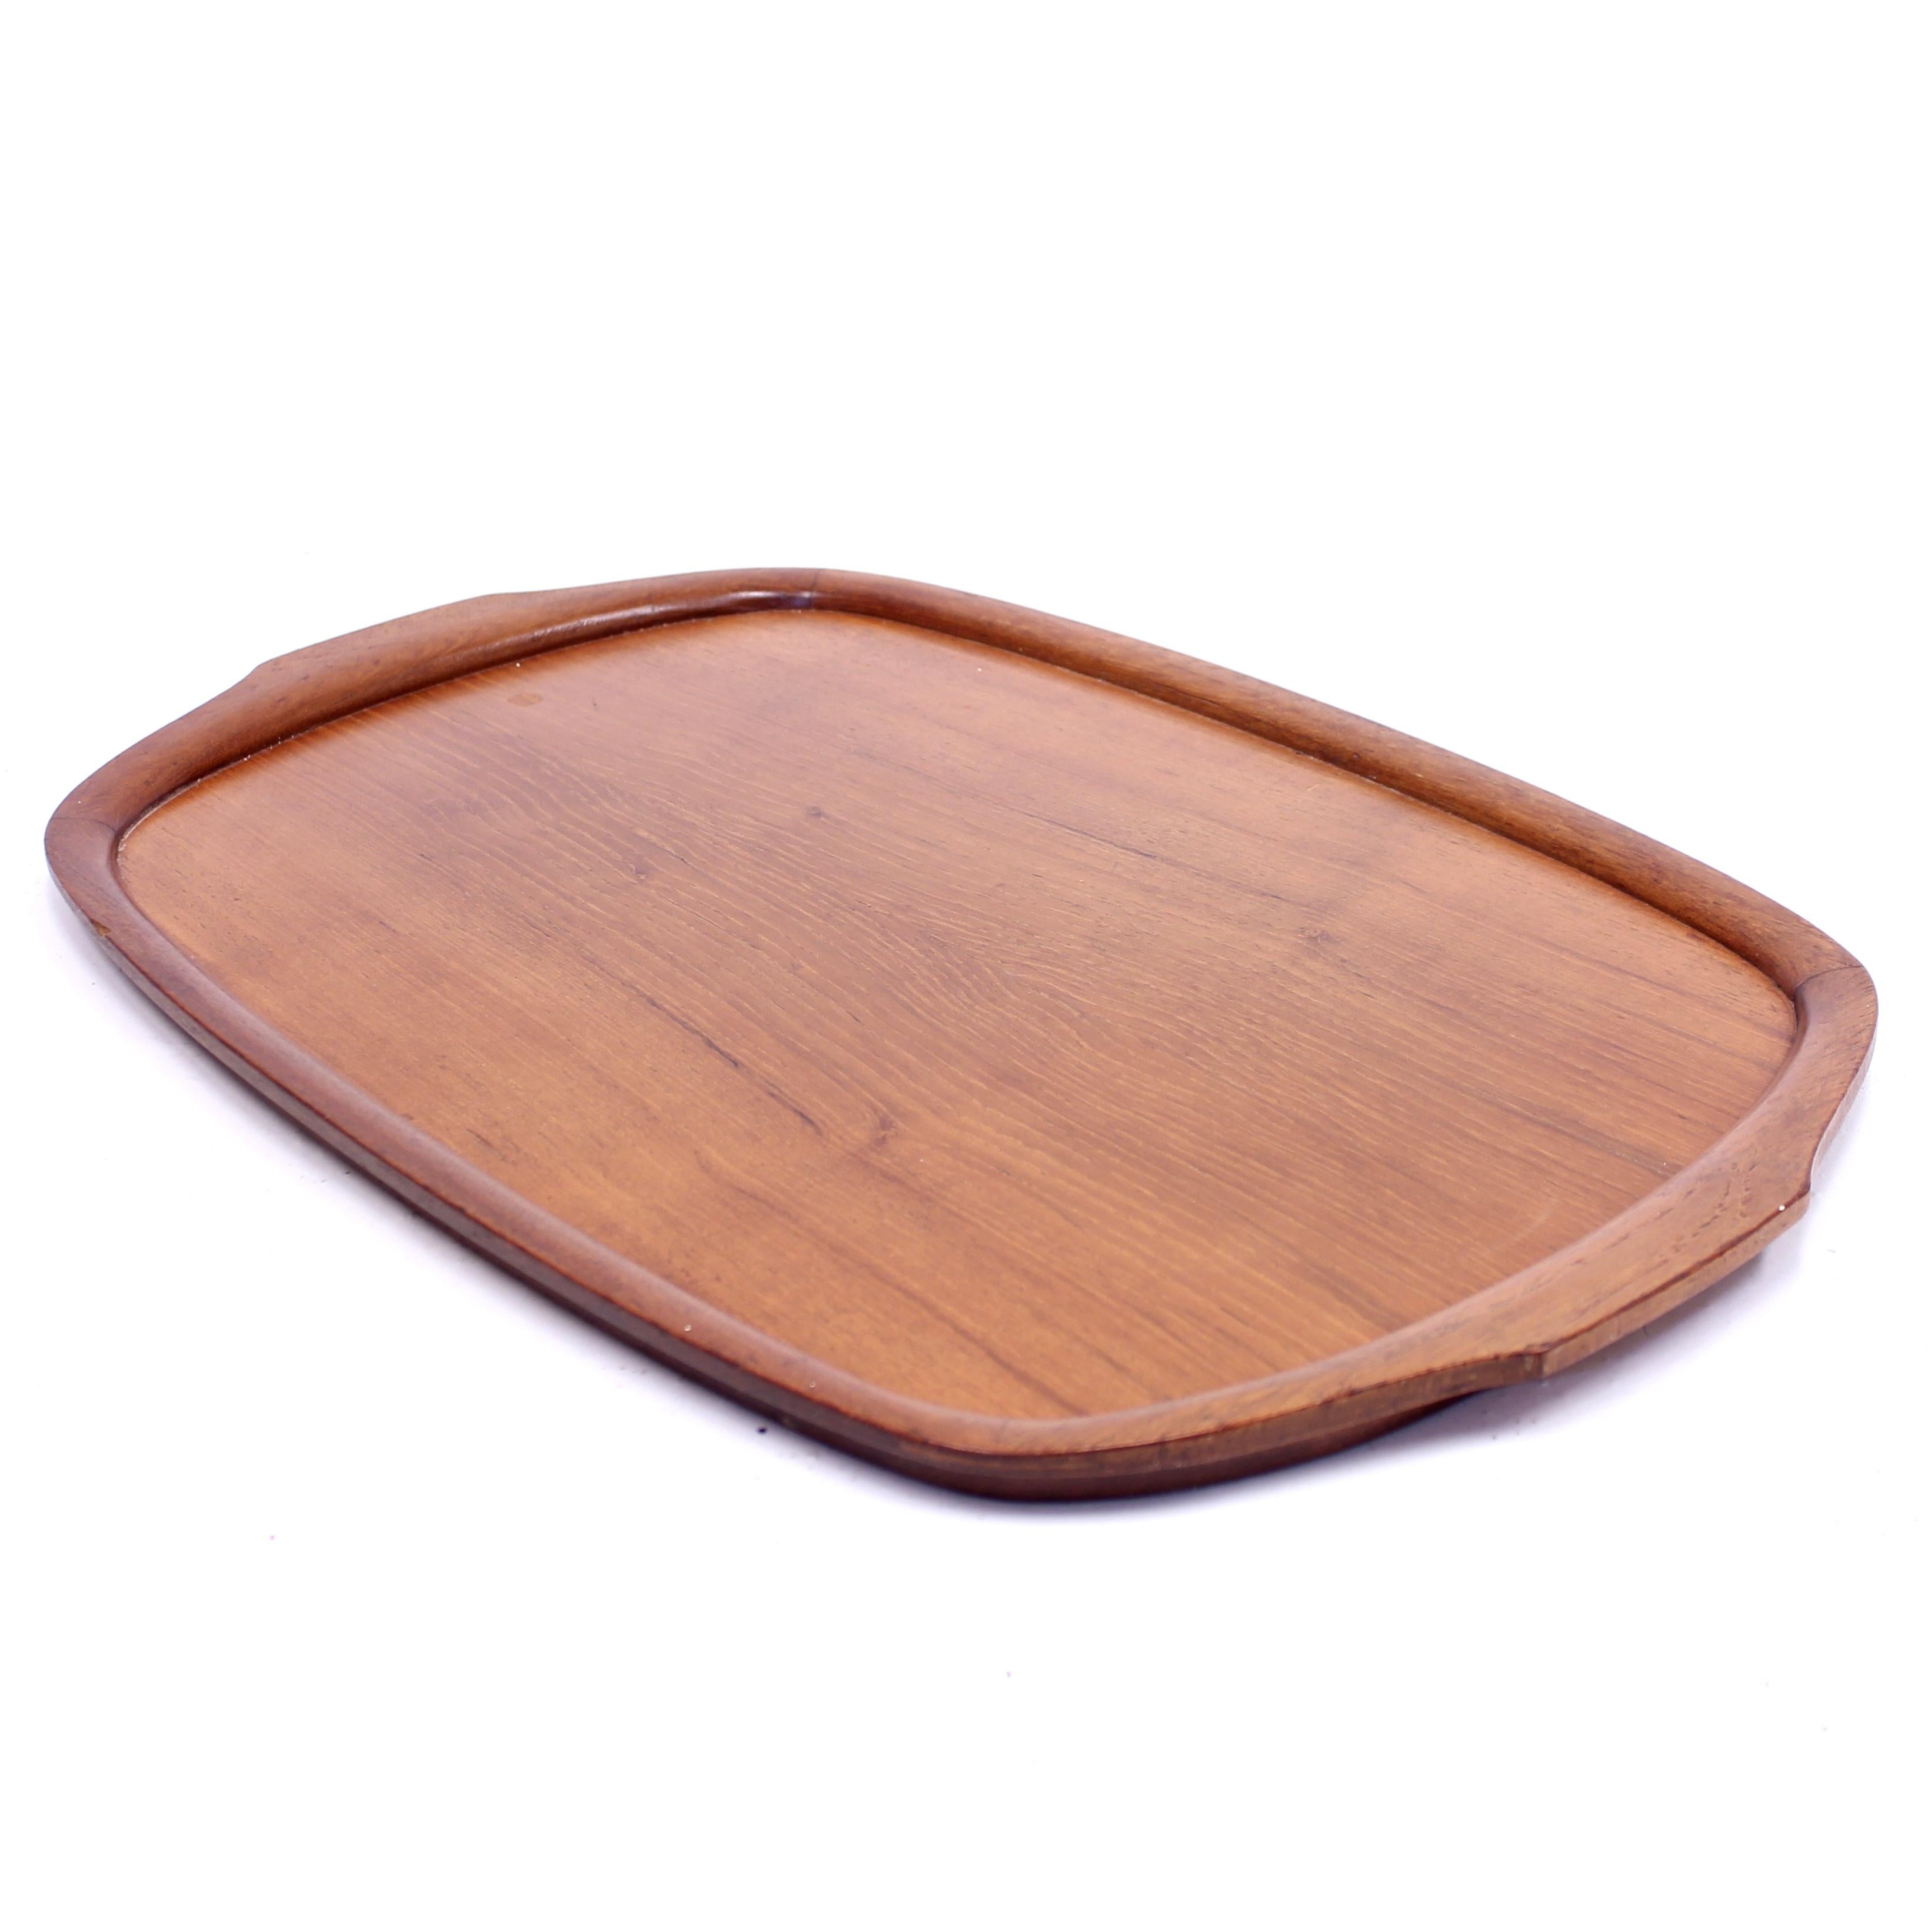 Solid Swedish teak tray produced by Karl Holmberg i Götene AB. Marked by maker with sticker on the underside. Light ware consistent with age and use.